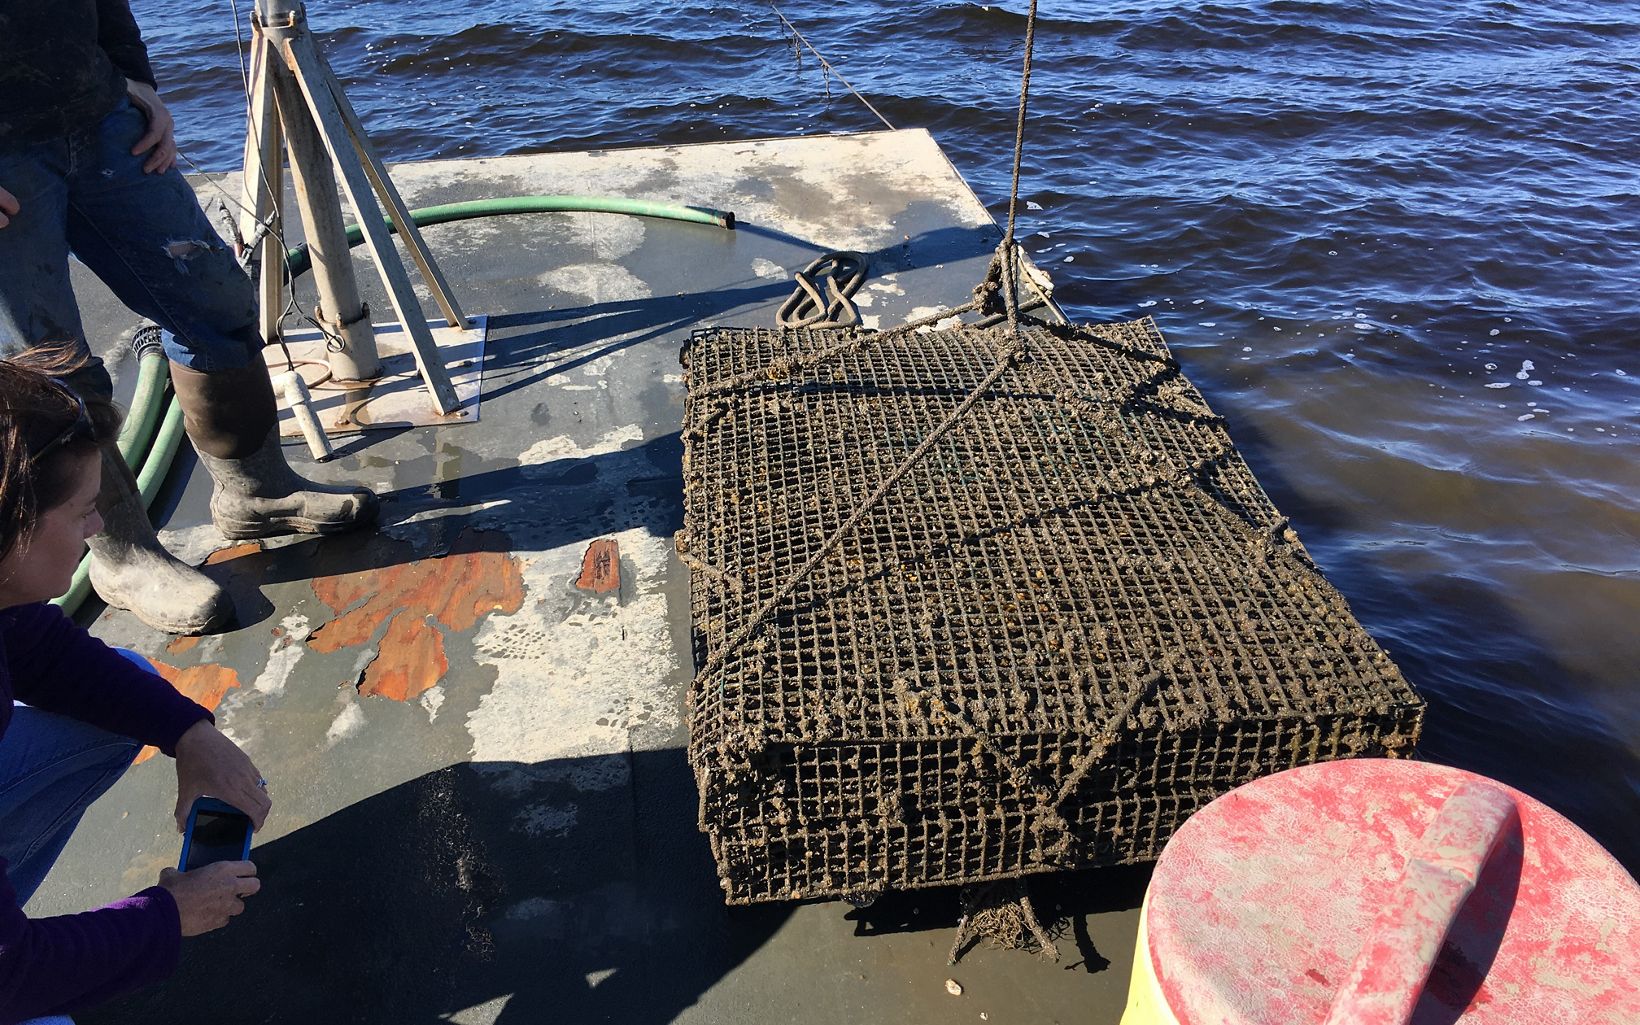 These oyster cages rest on the bottom of the river or bay.